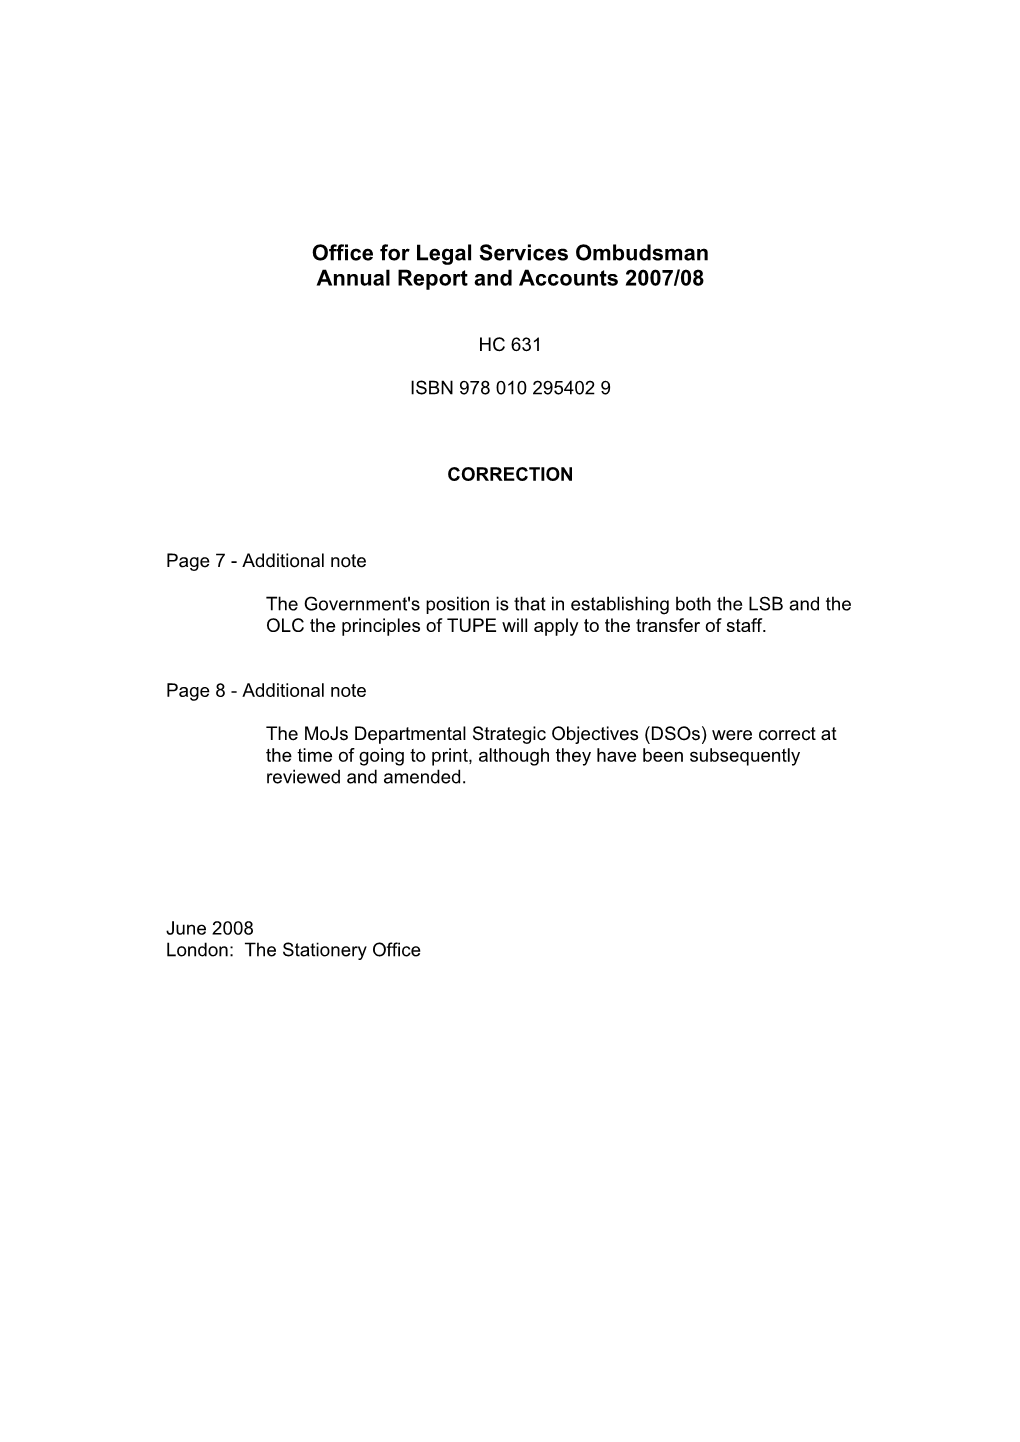 Office for Legal Services Ombudsman Annual Report and Accounts 2007/08